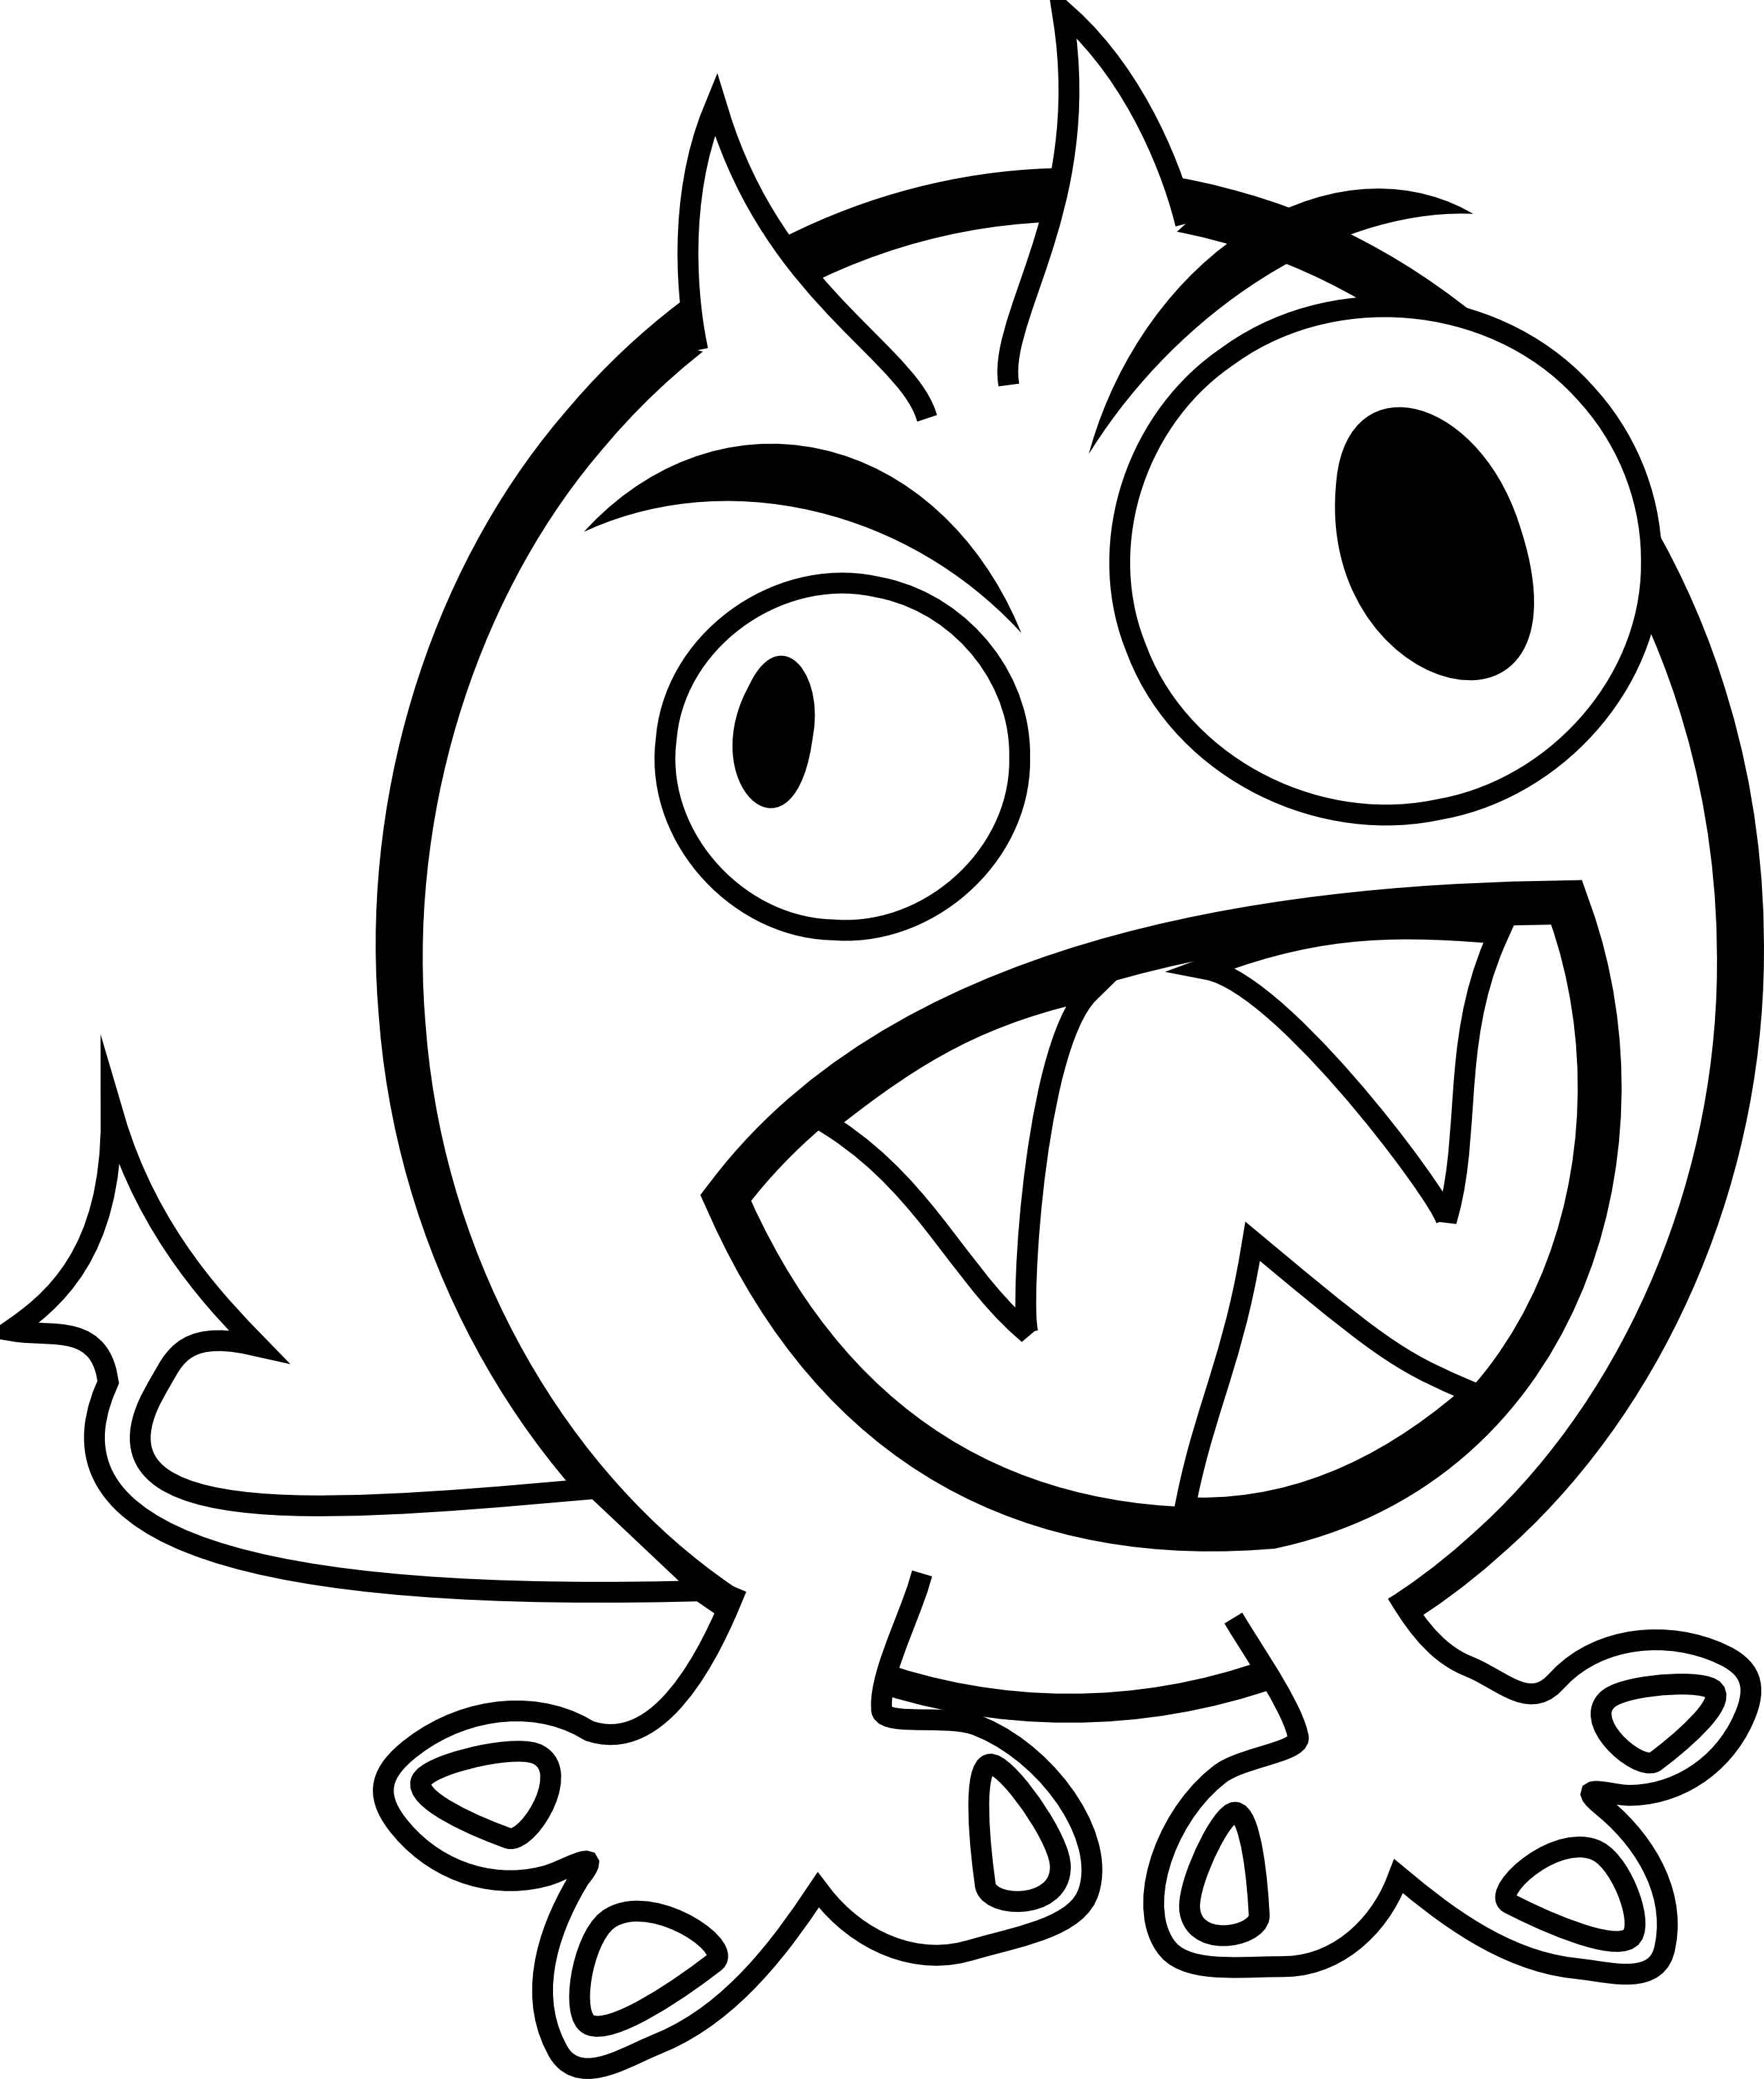 Monster Inc Clipart Black And White - Monster Inc Black And White, Transparent background PNG HD thumbnail